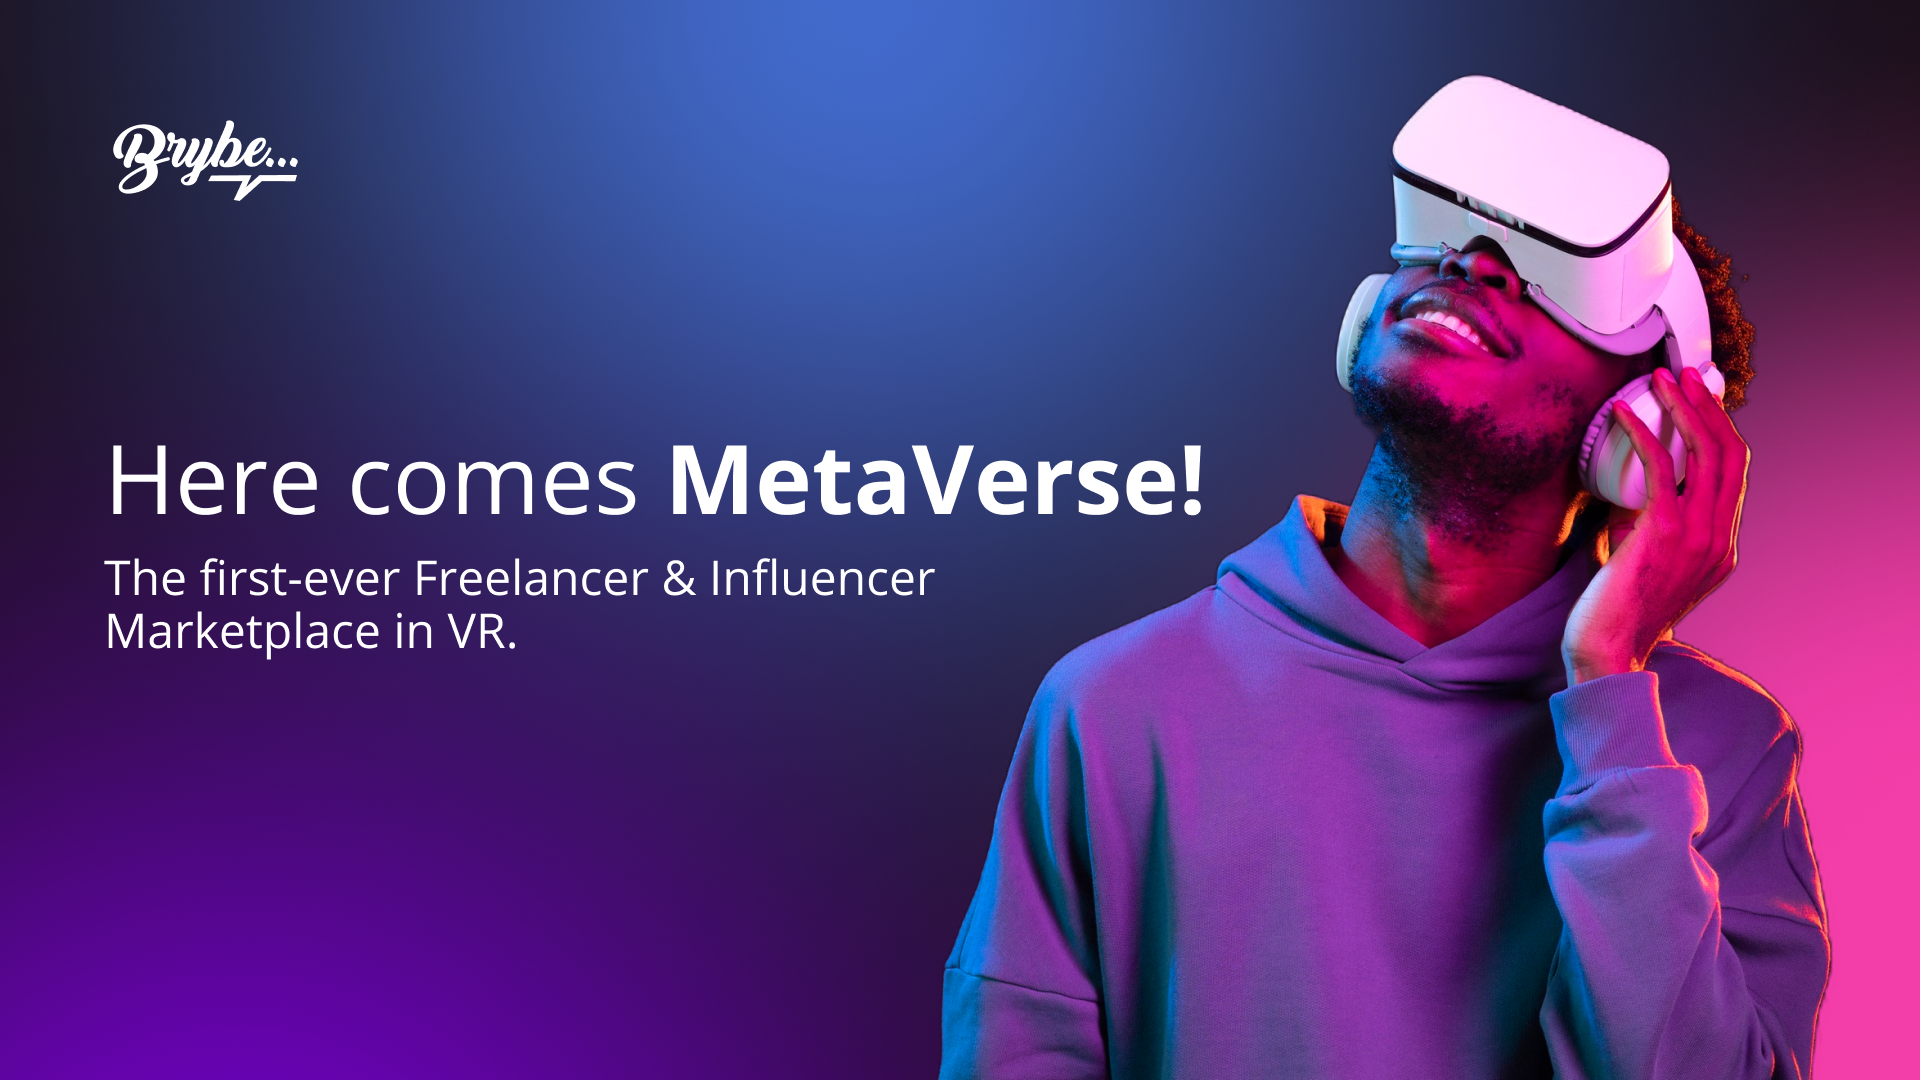 <div>How Fond Are Marketers Of The MetaVerse, Crypto & NFTs?</div>